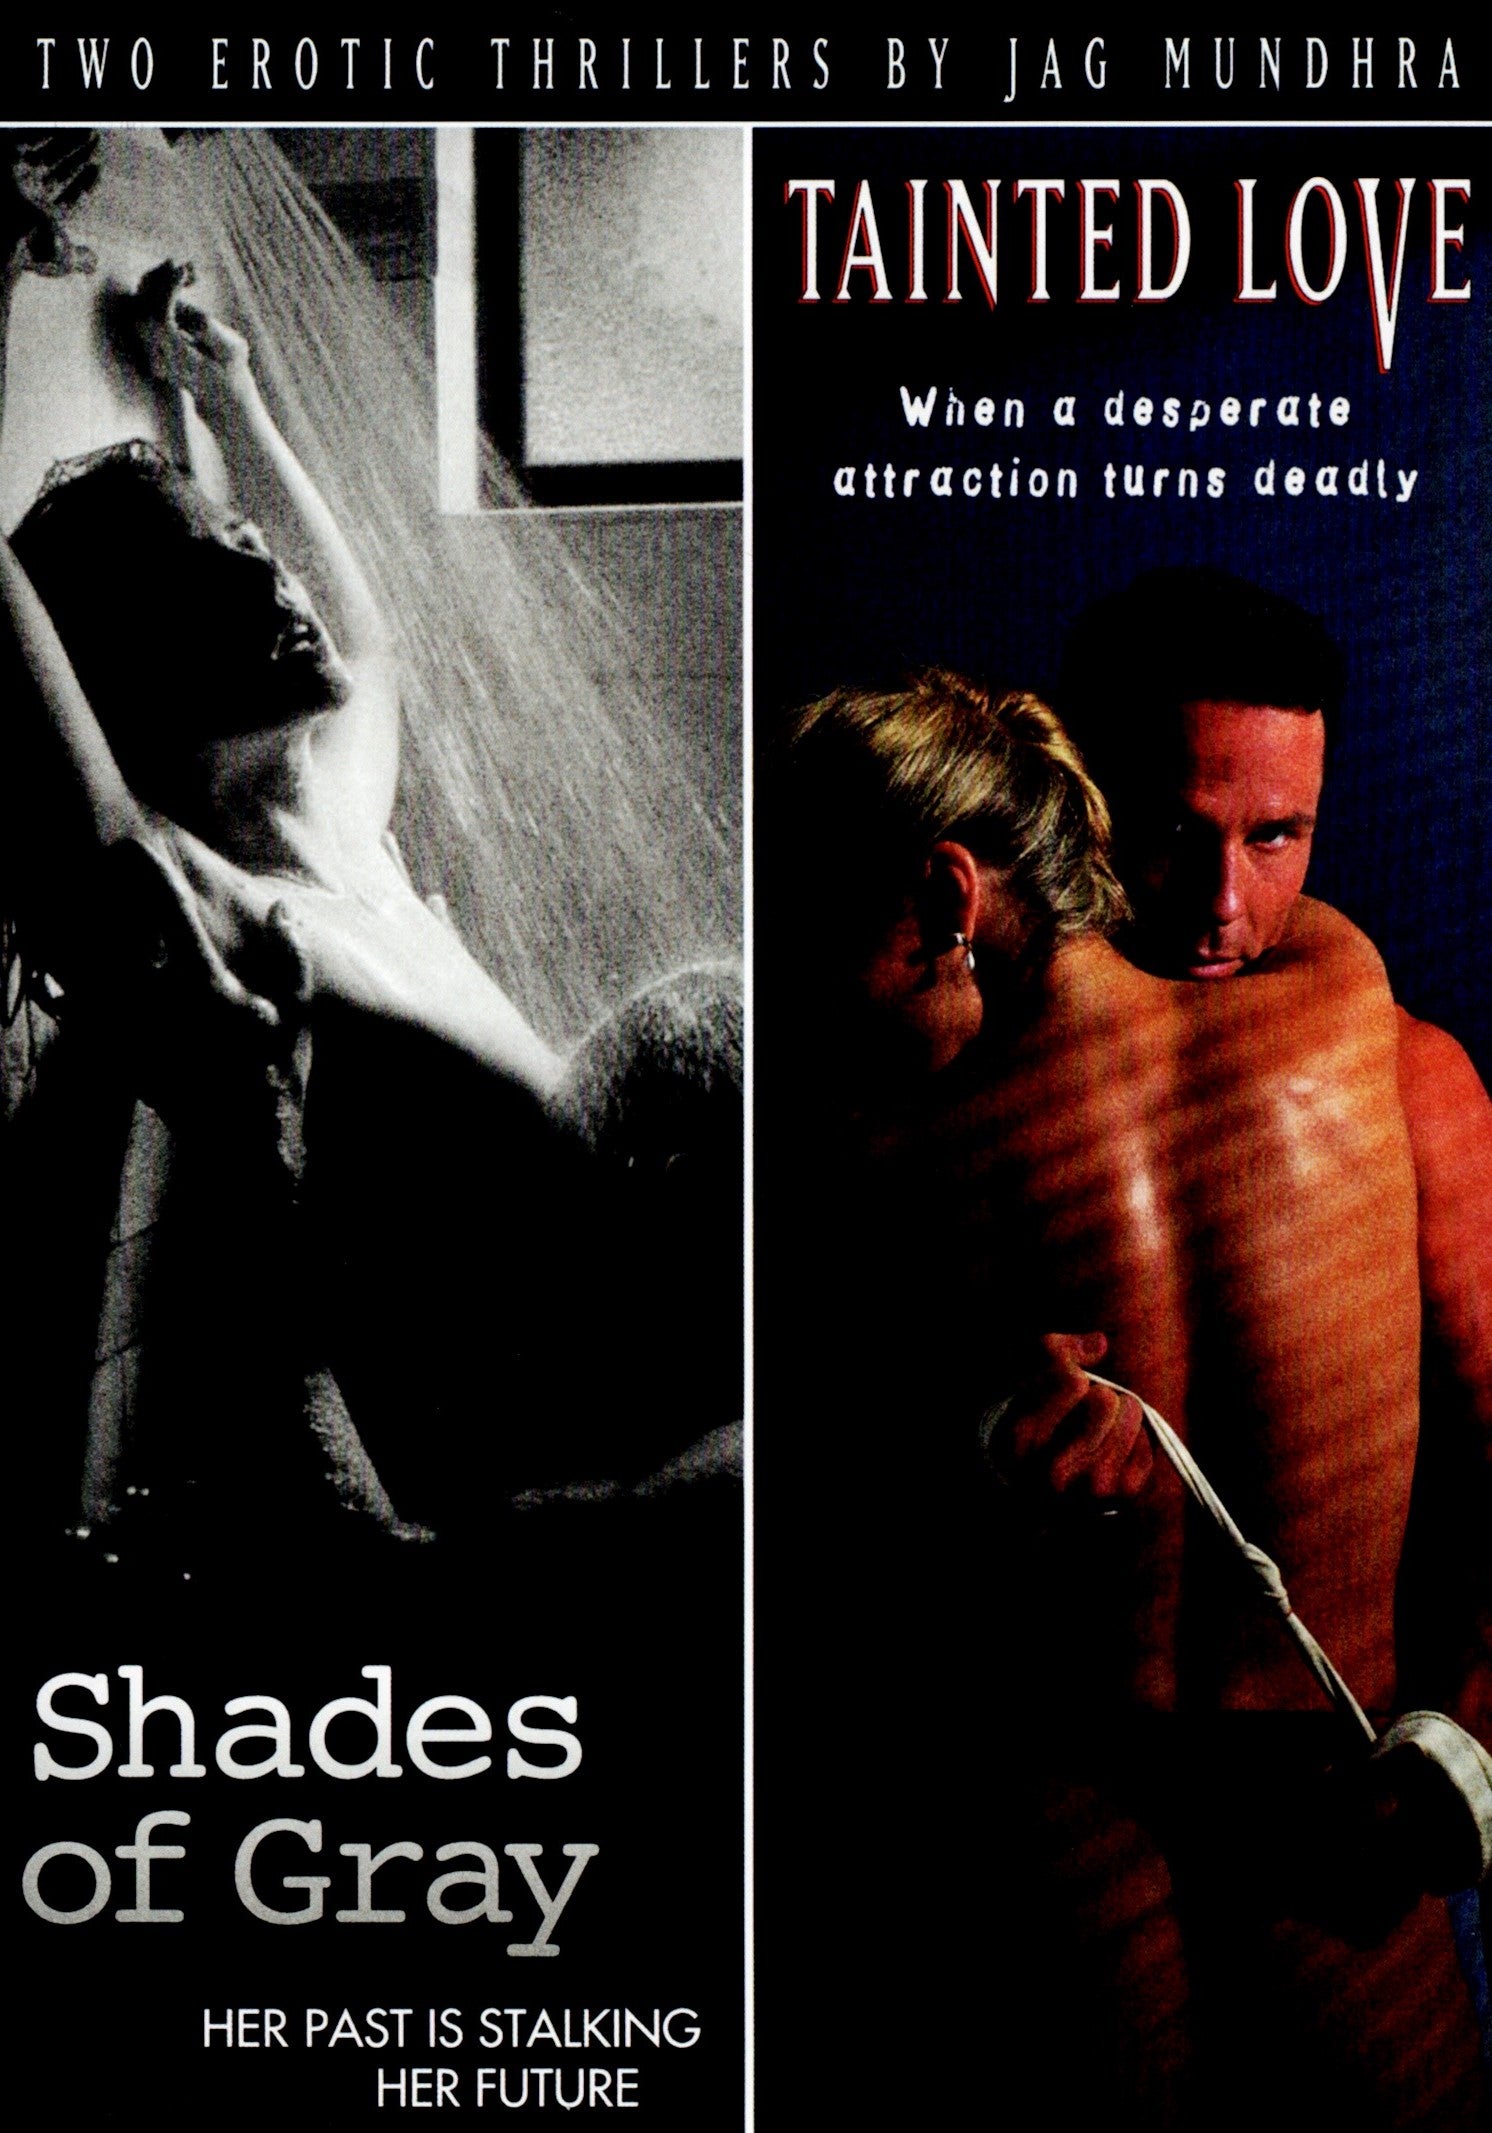 SHADES OF GRAY / TAINTED LOVE DVD